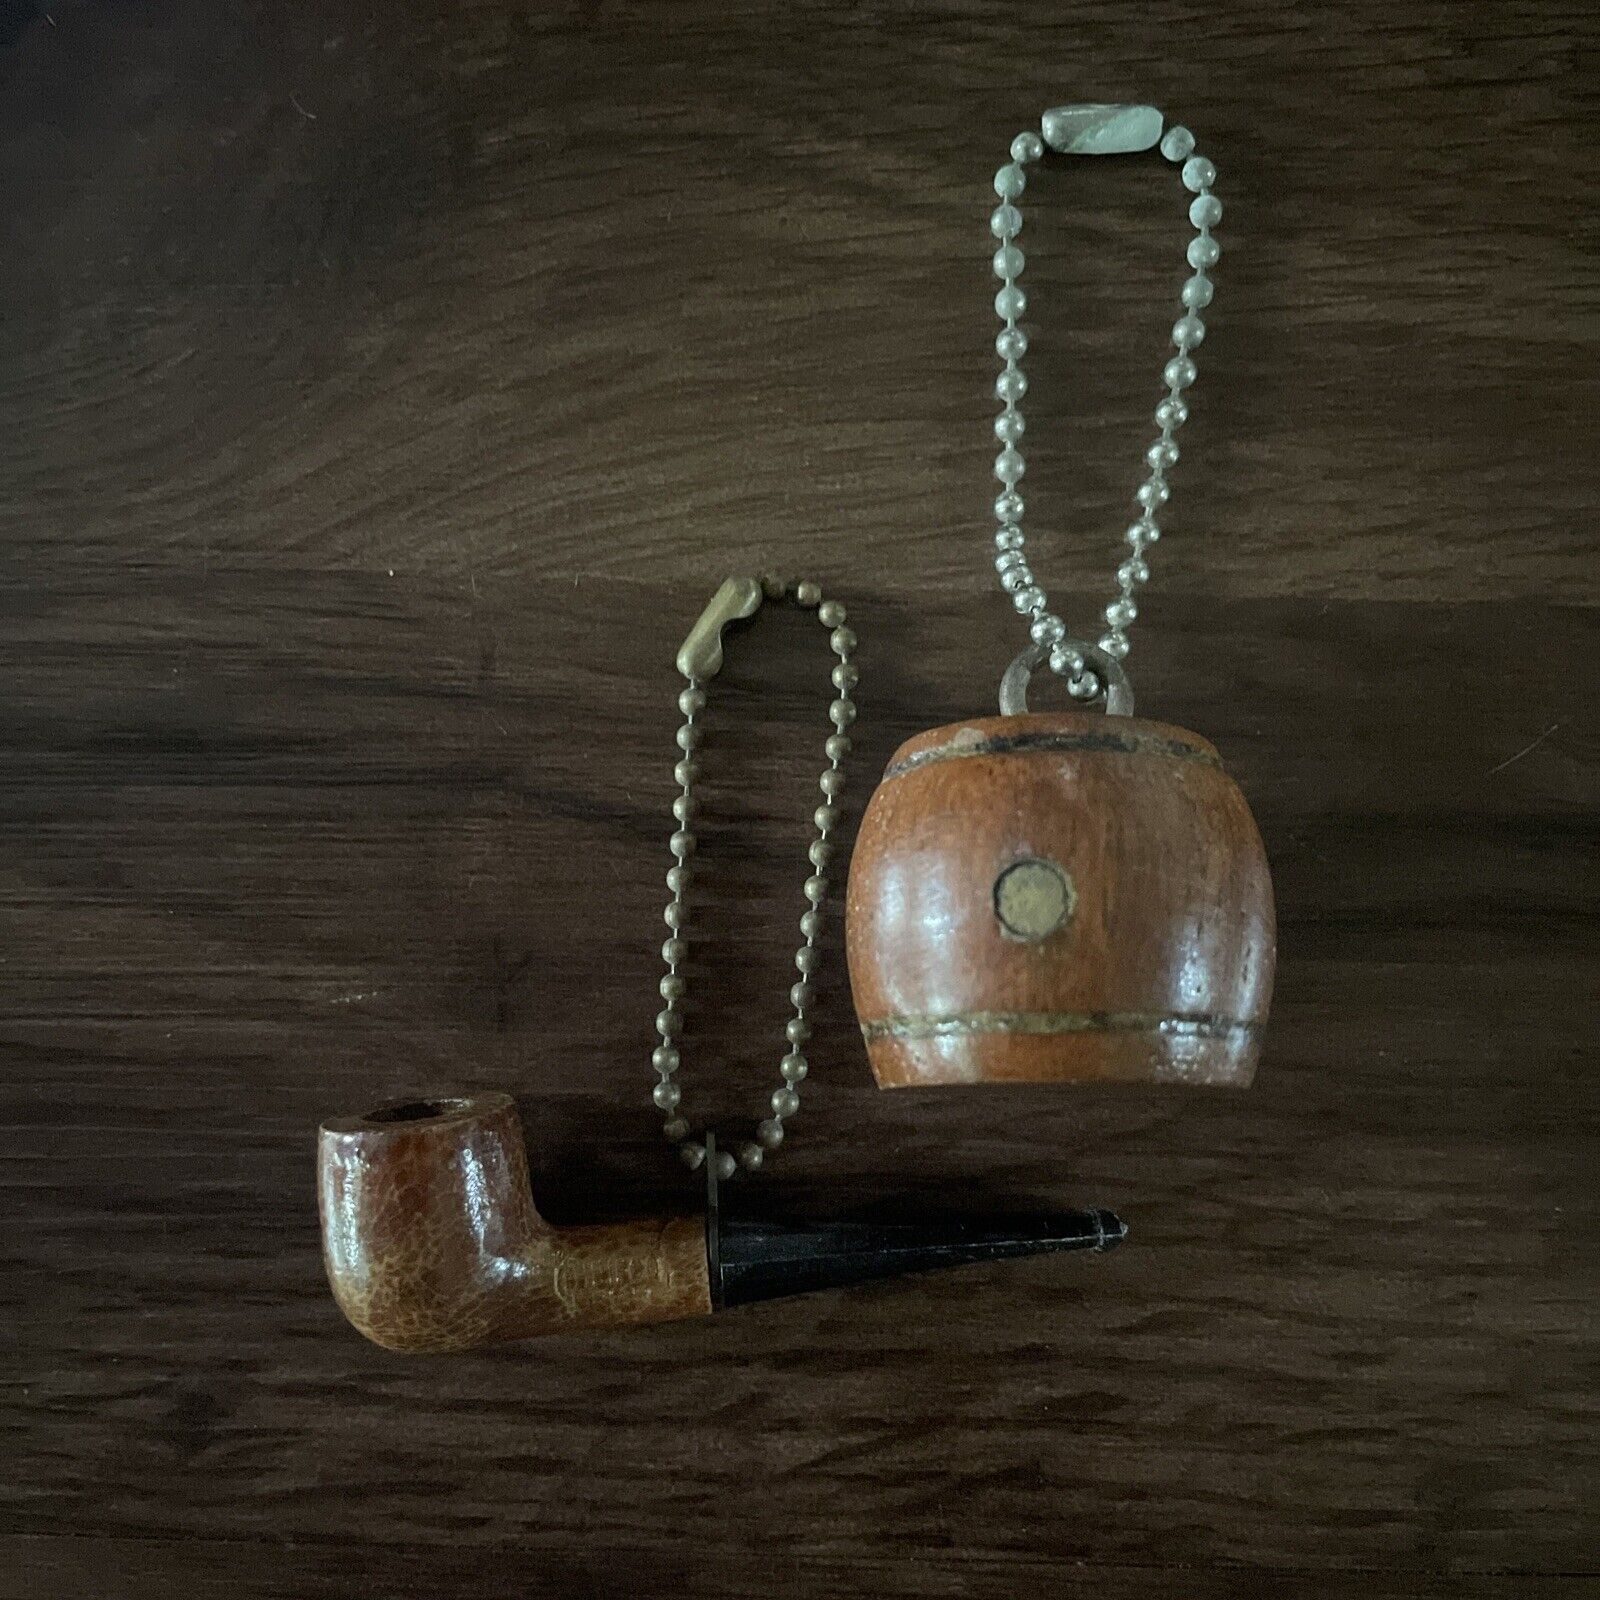 Vintage Thrifco Briar Mini Tobacco Smoking Pipe Made in Italy & Barrel Keychain